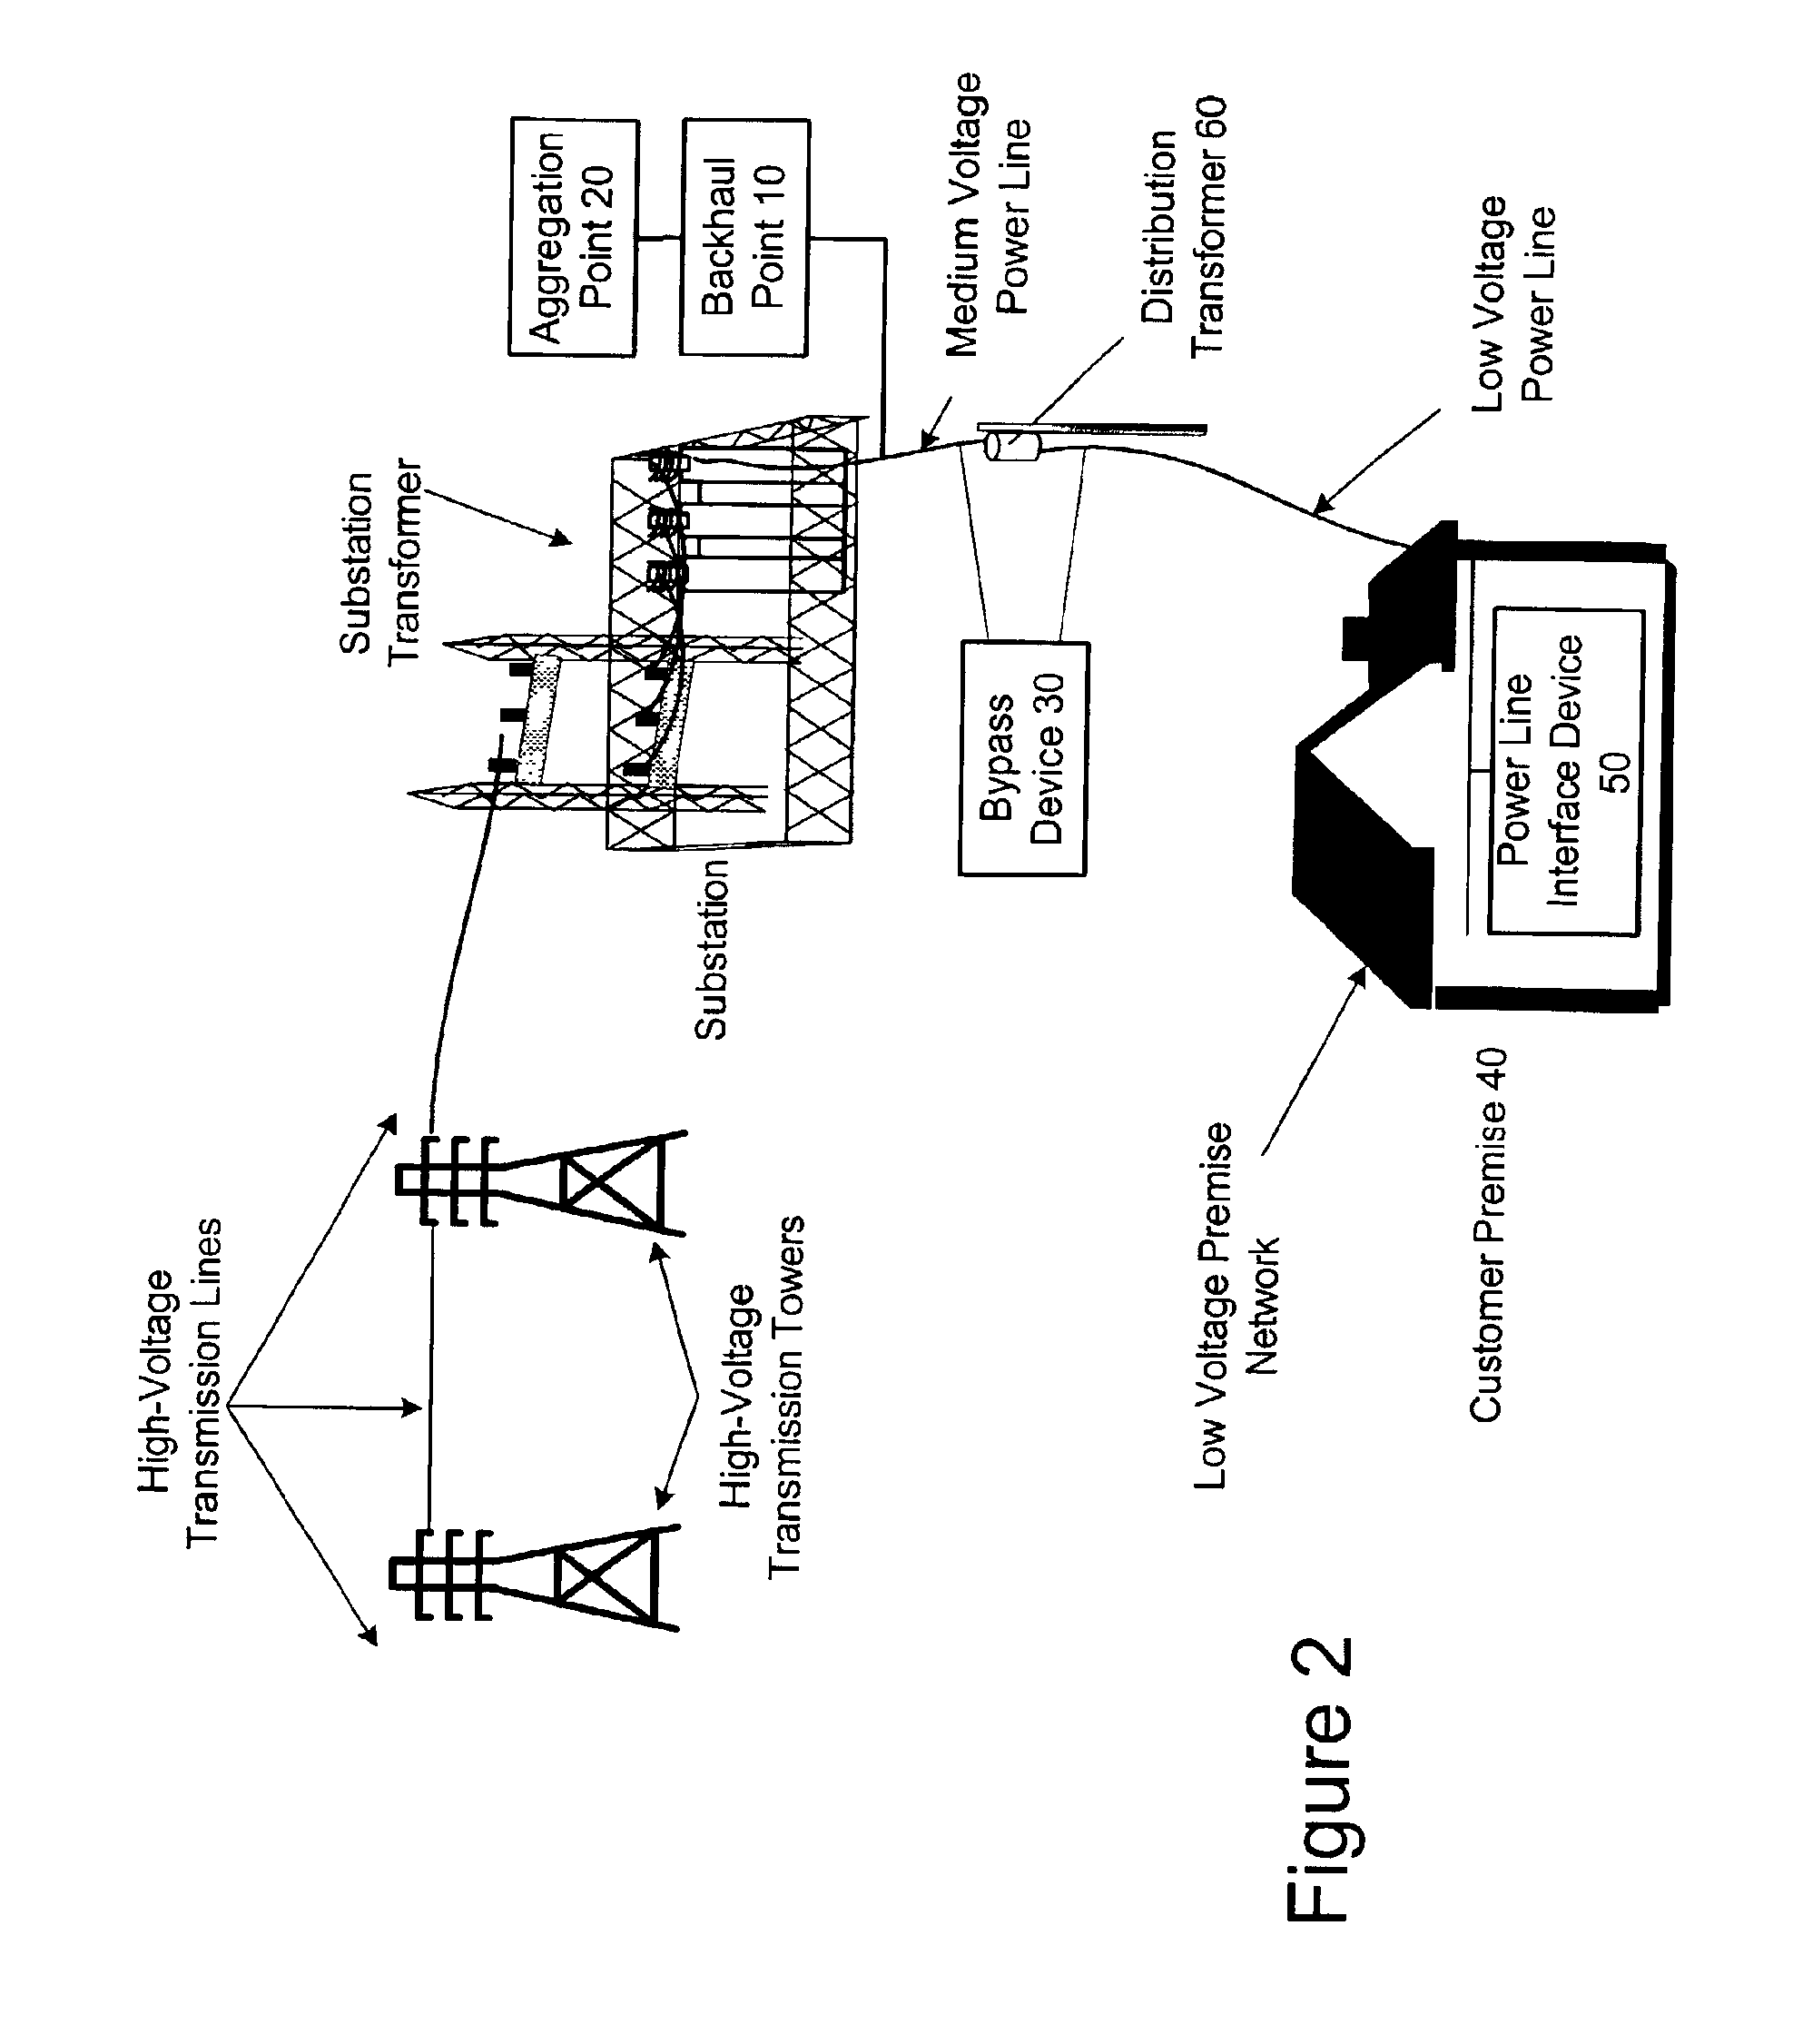 Power line communication system and method of using the same